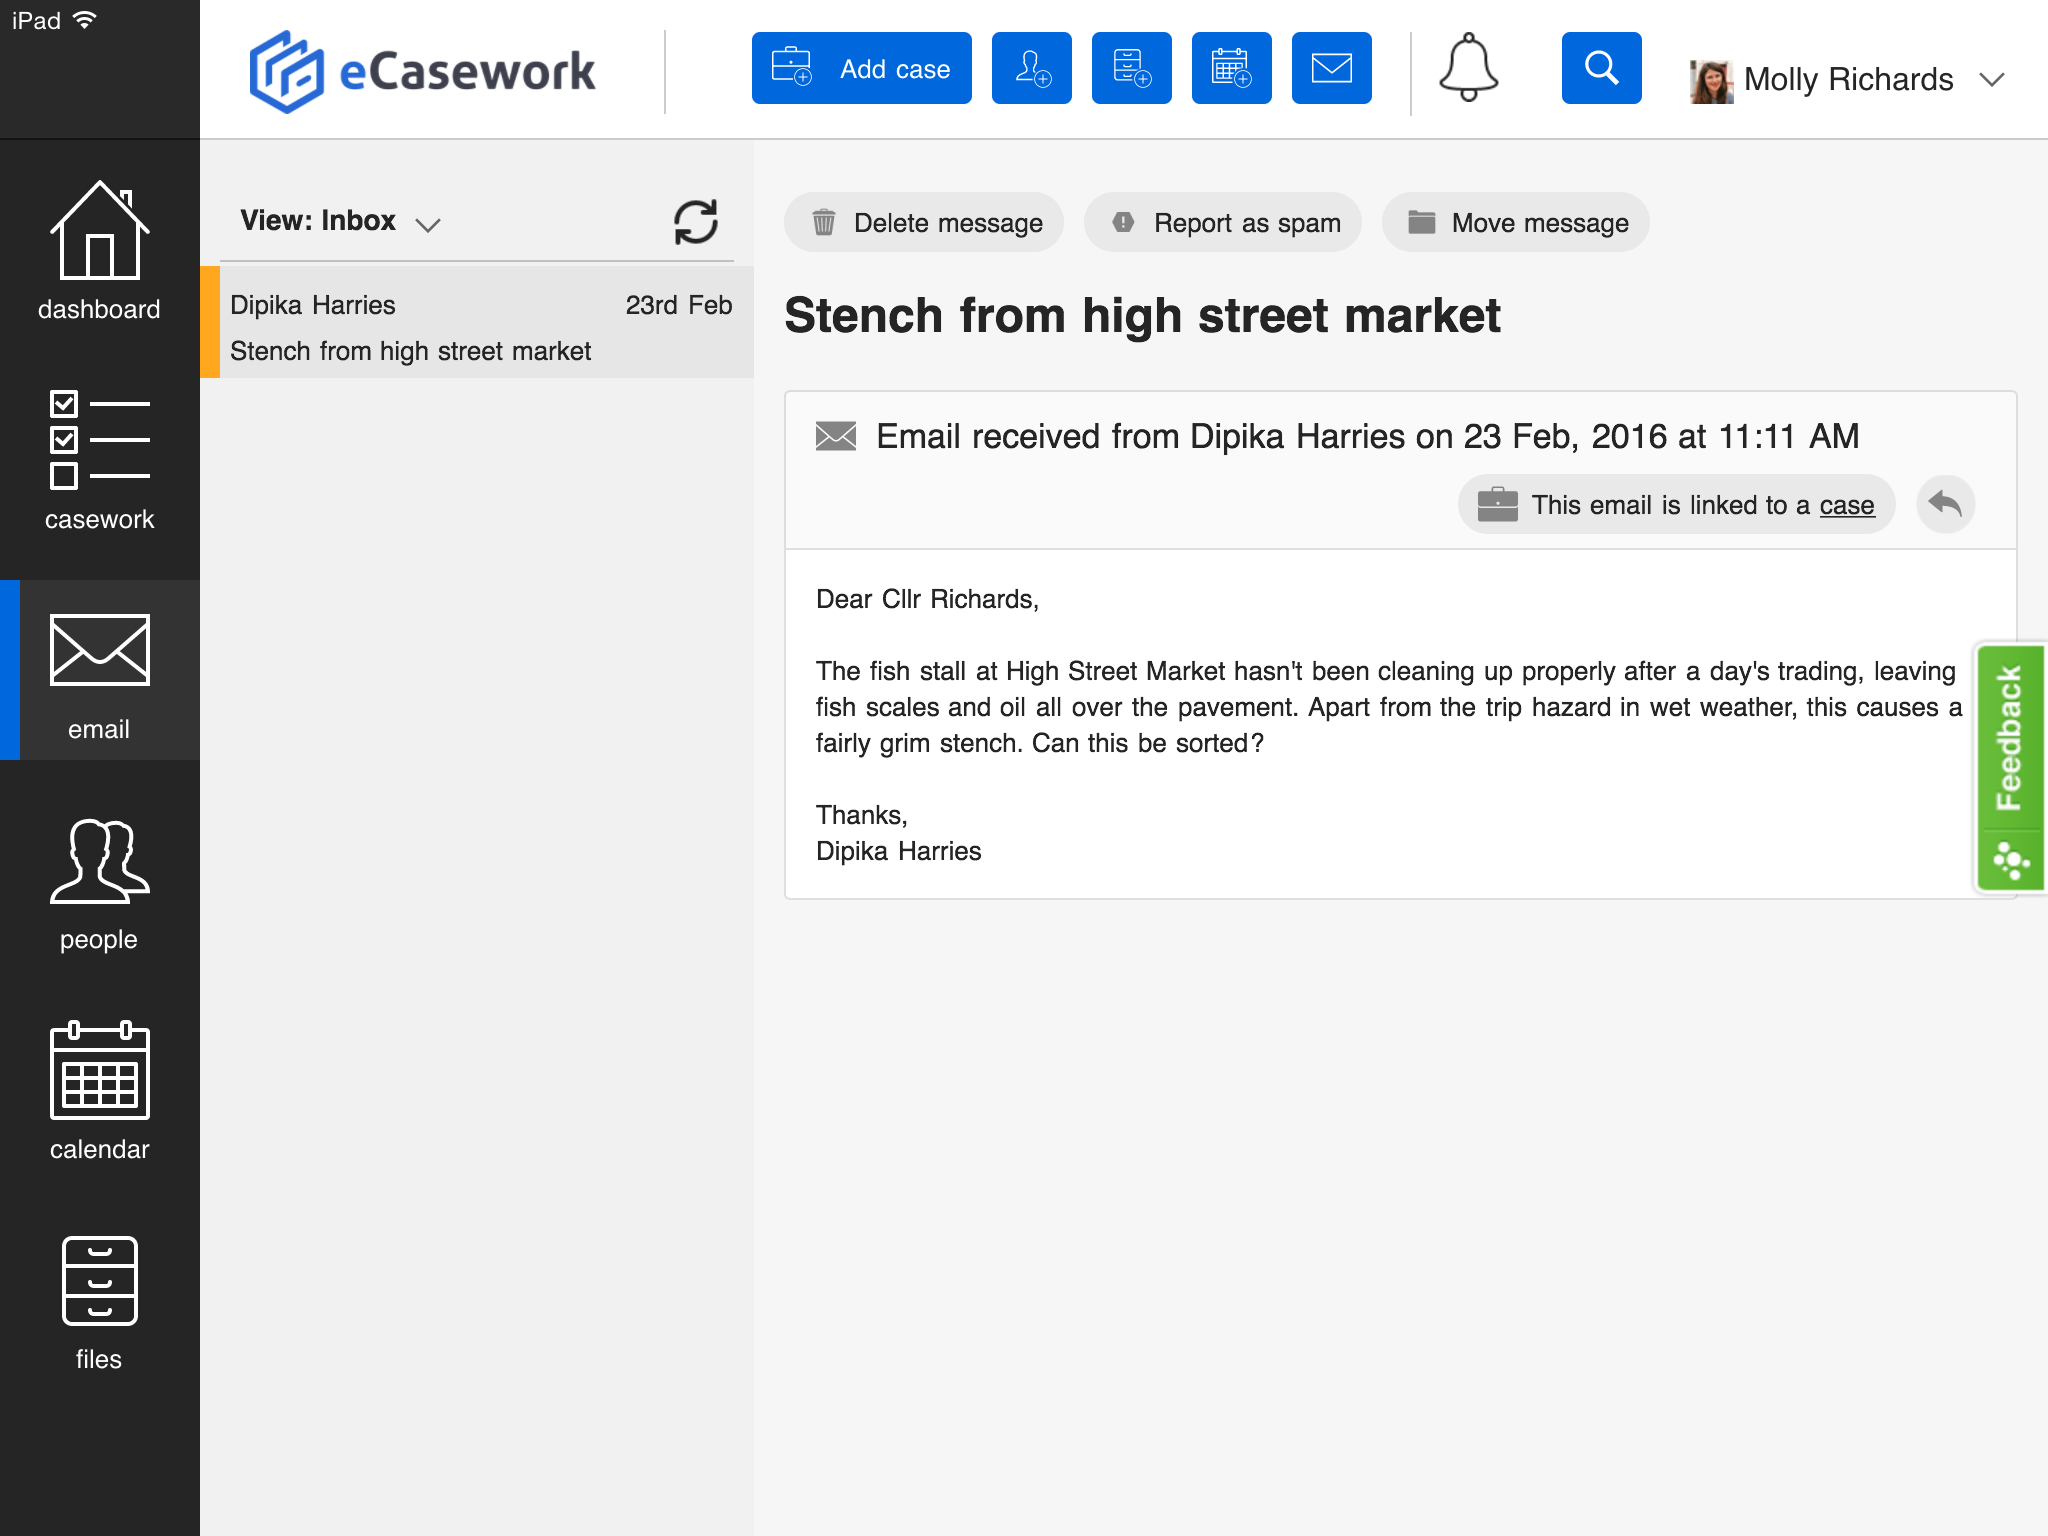 A screenshot of the eCasework email section